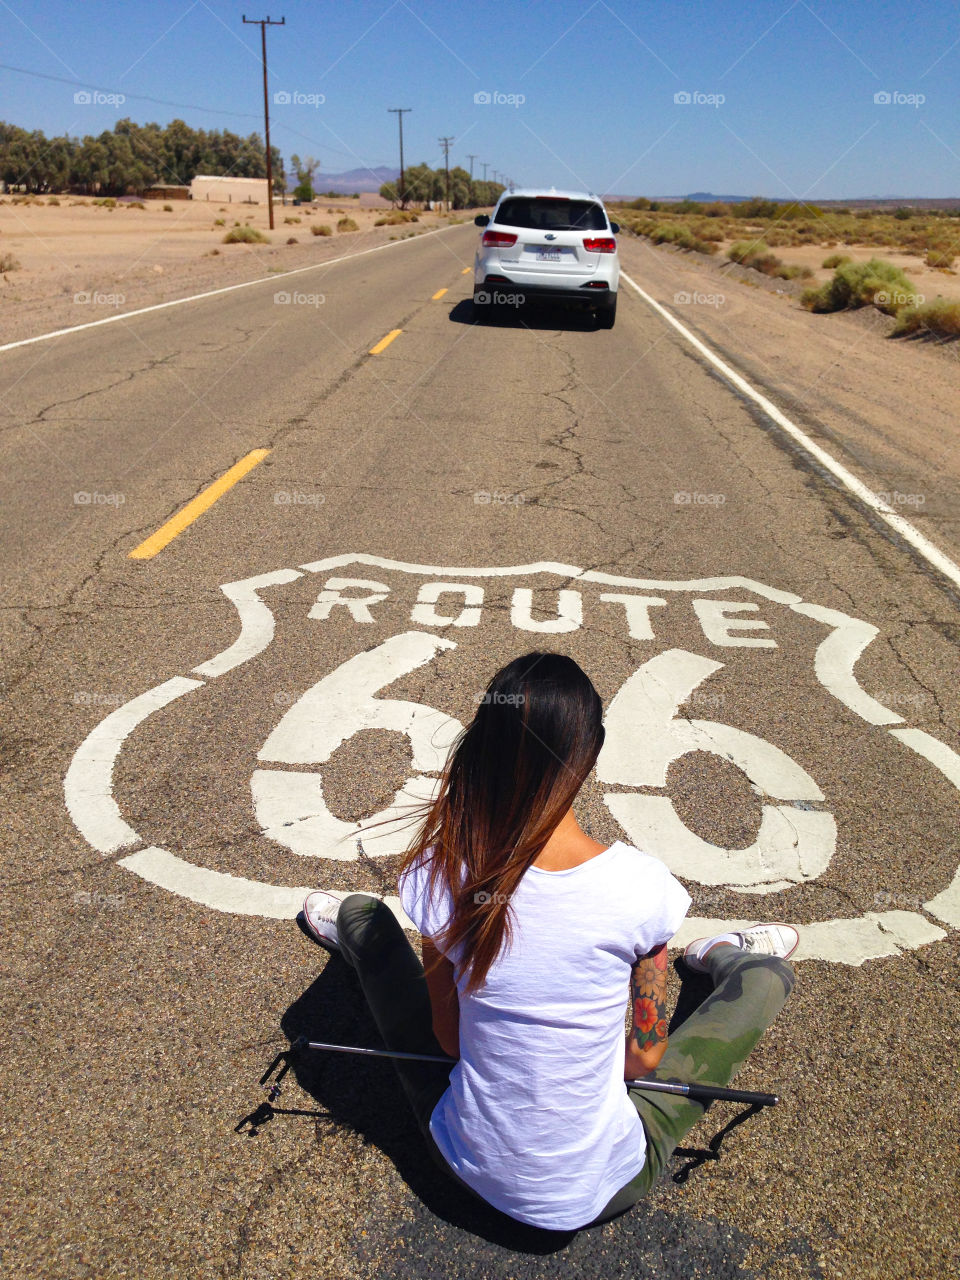 Me and route 66. My car is waiting for me on the route 66